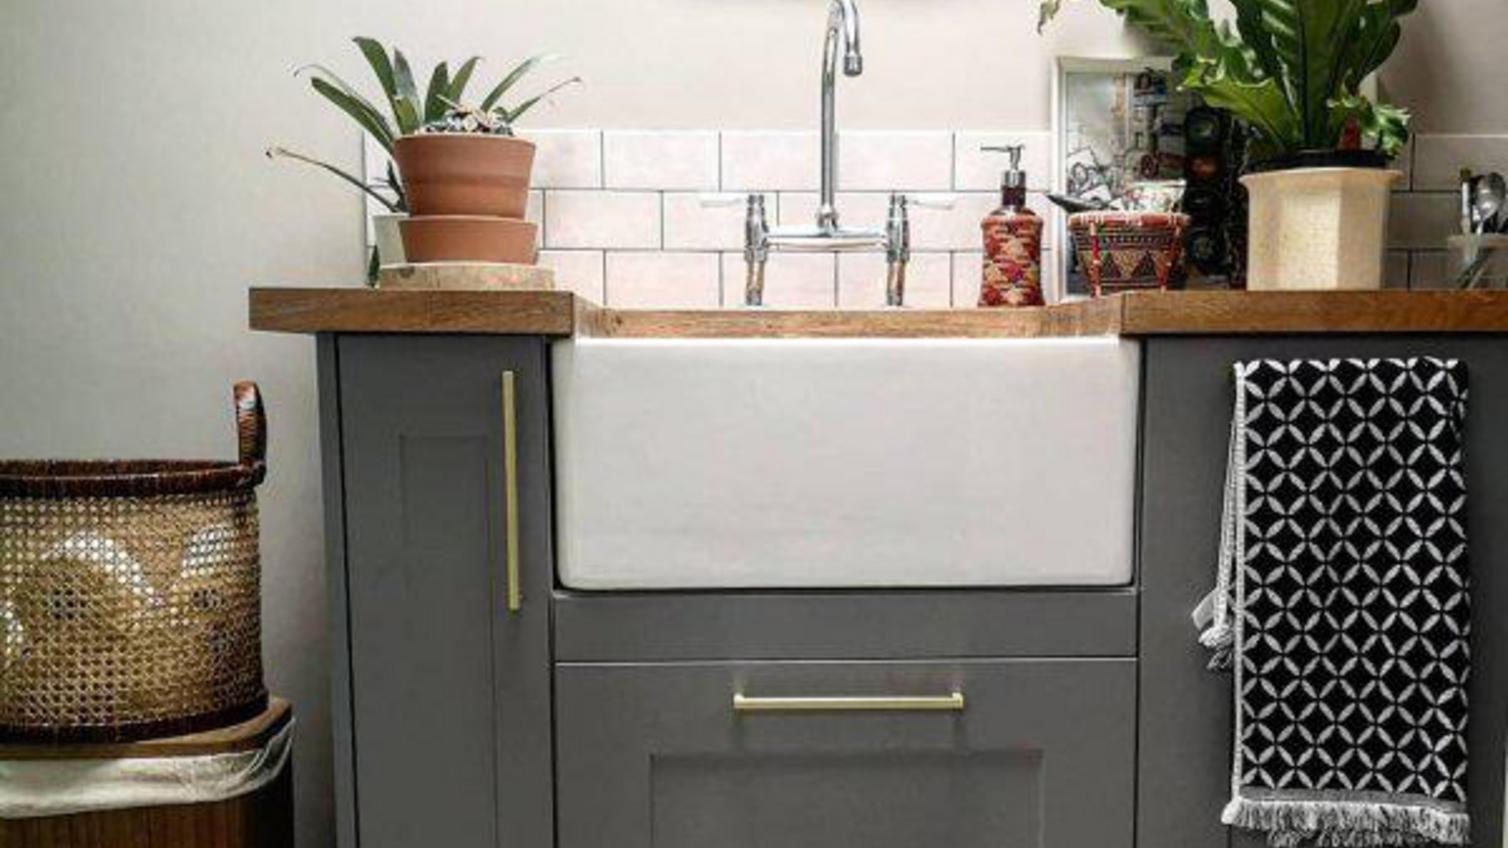 A small utility room area in a white, grey, and timber worktop